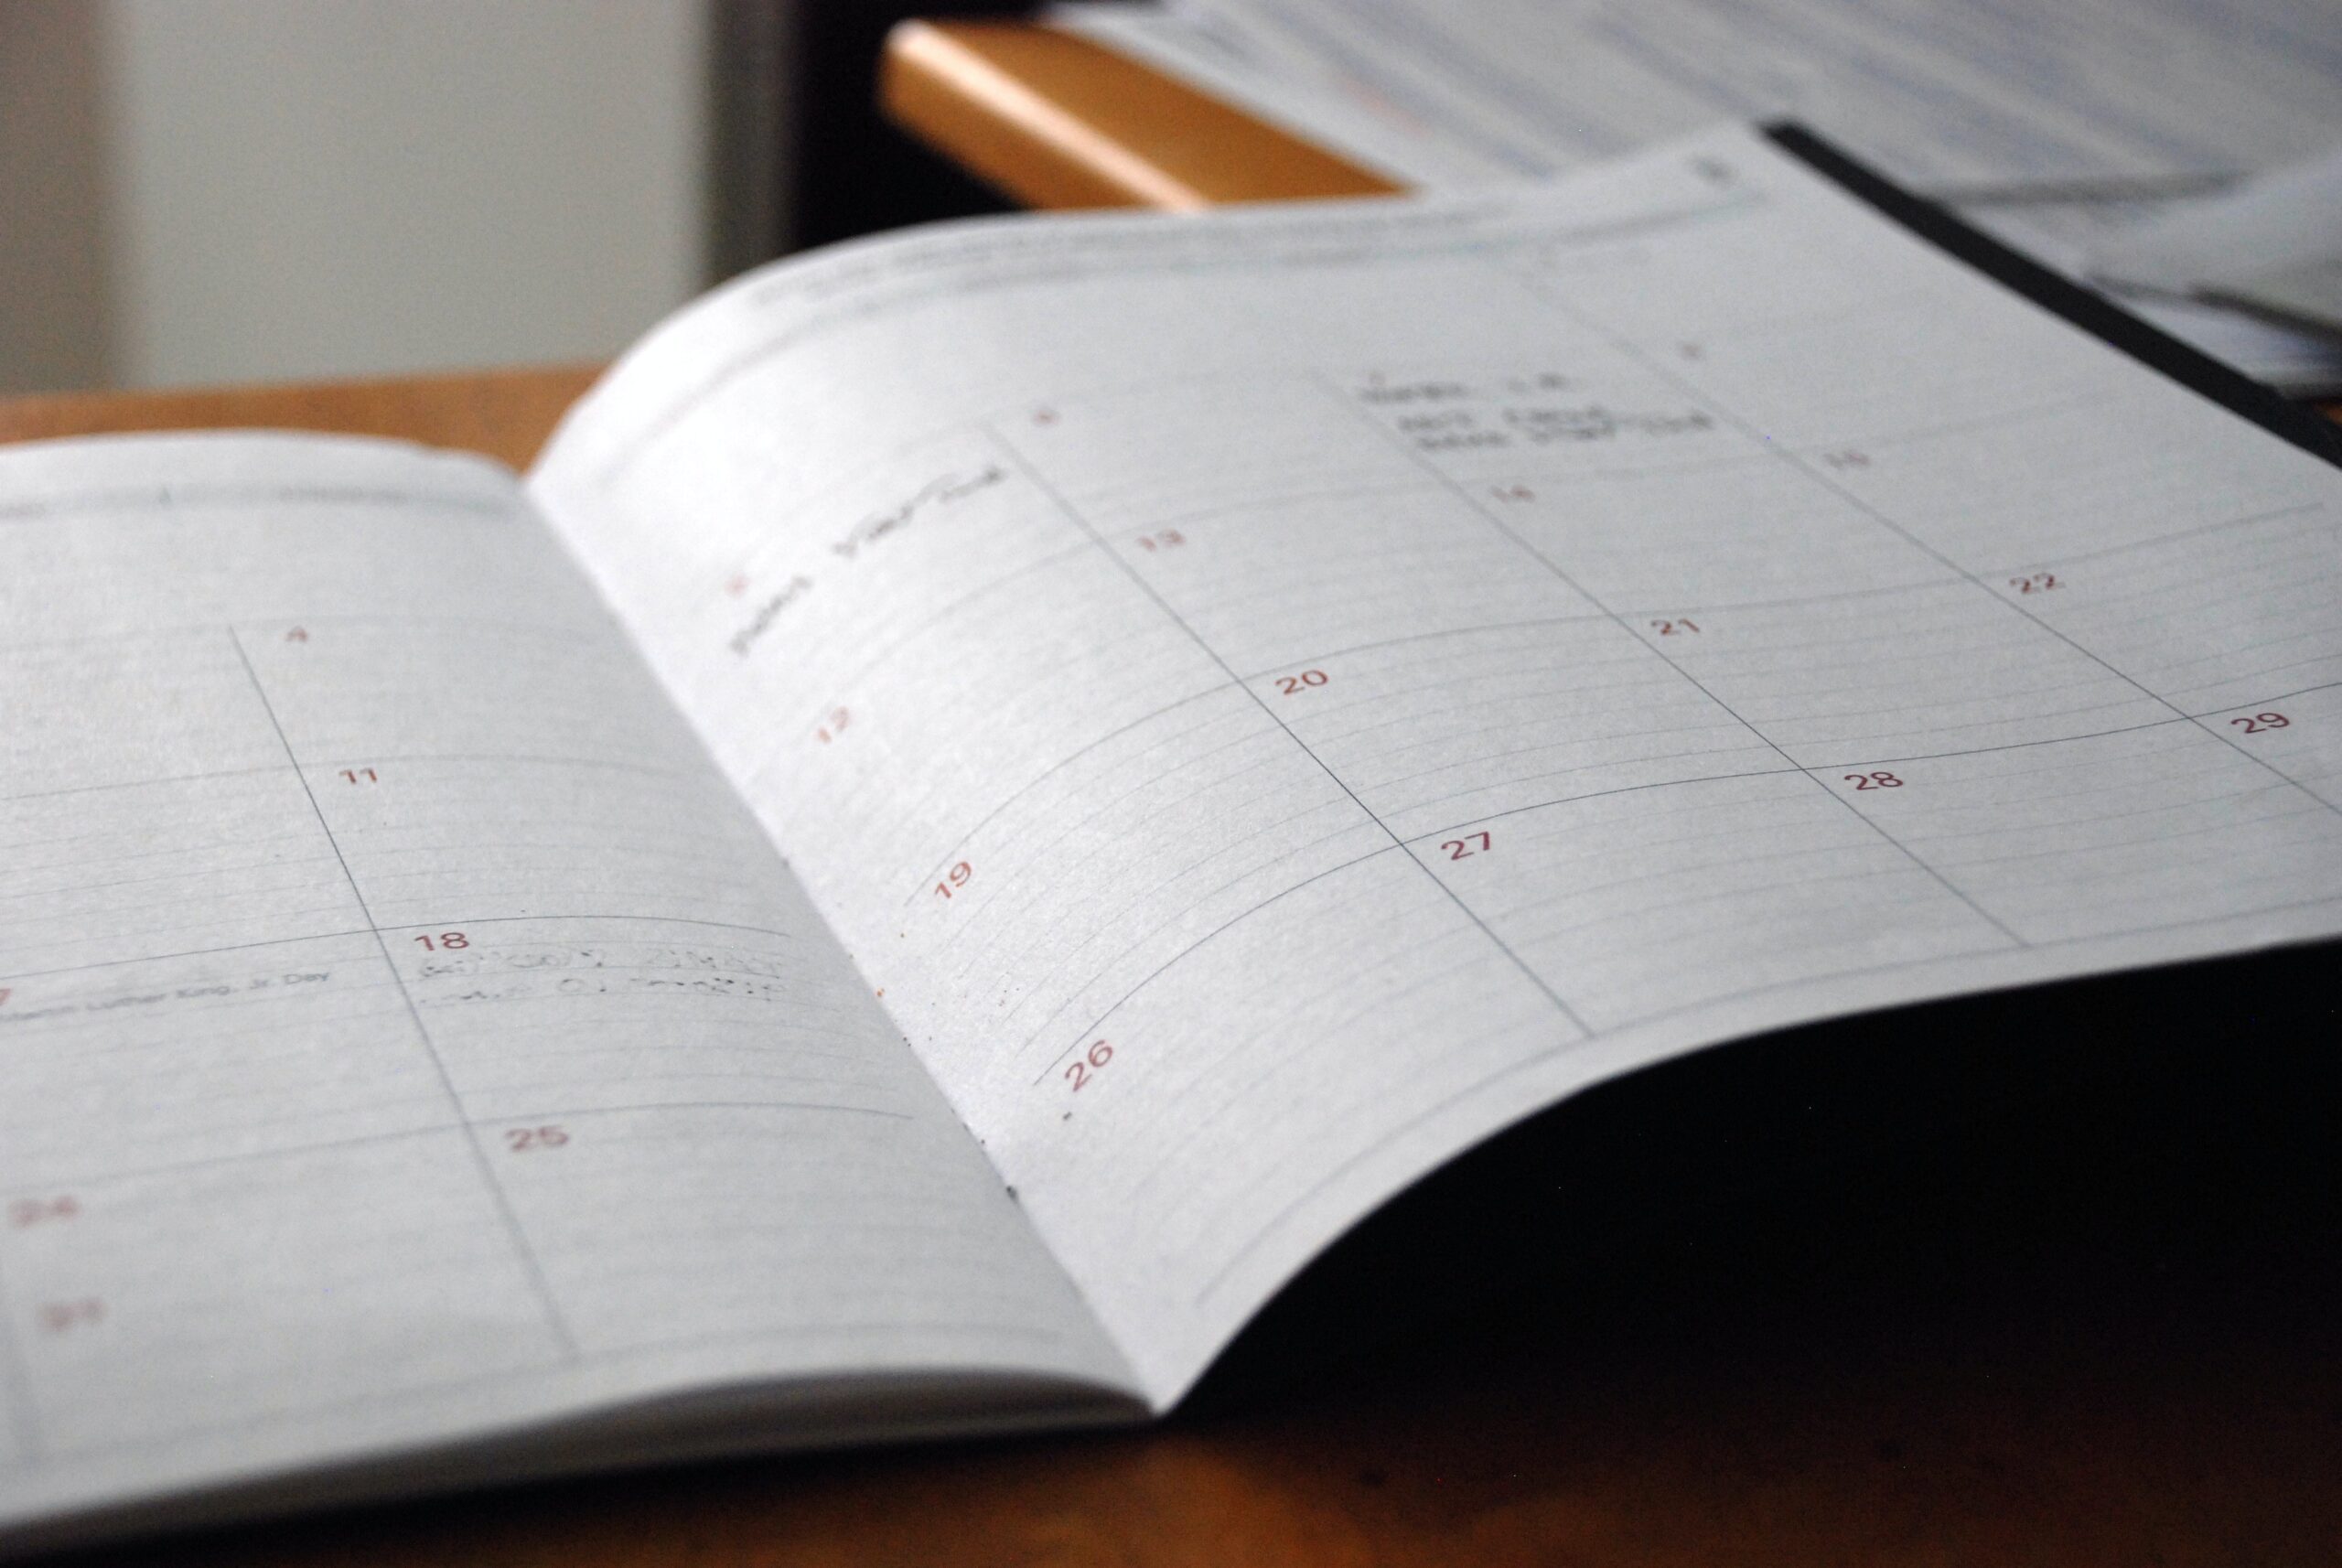 Calendar Planner Notebook with Writing In It